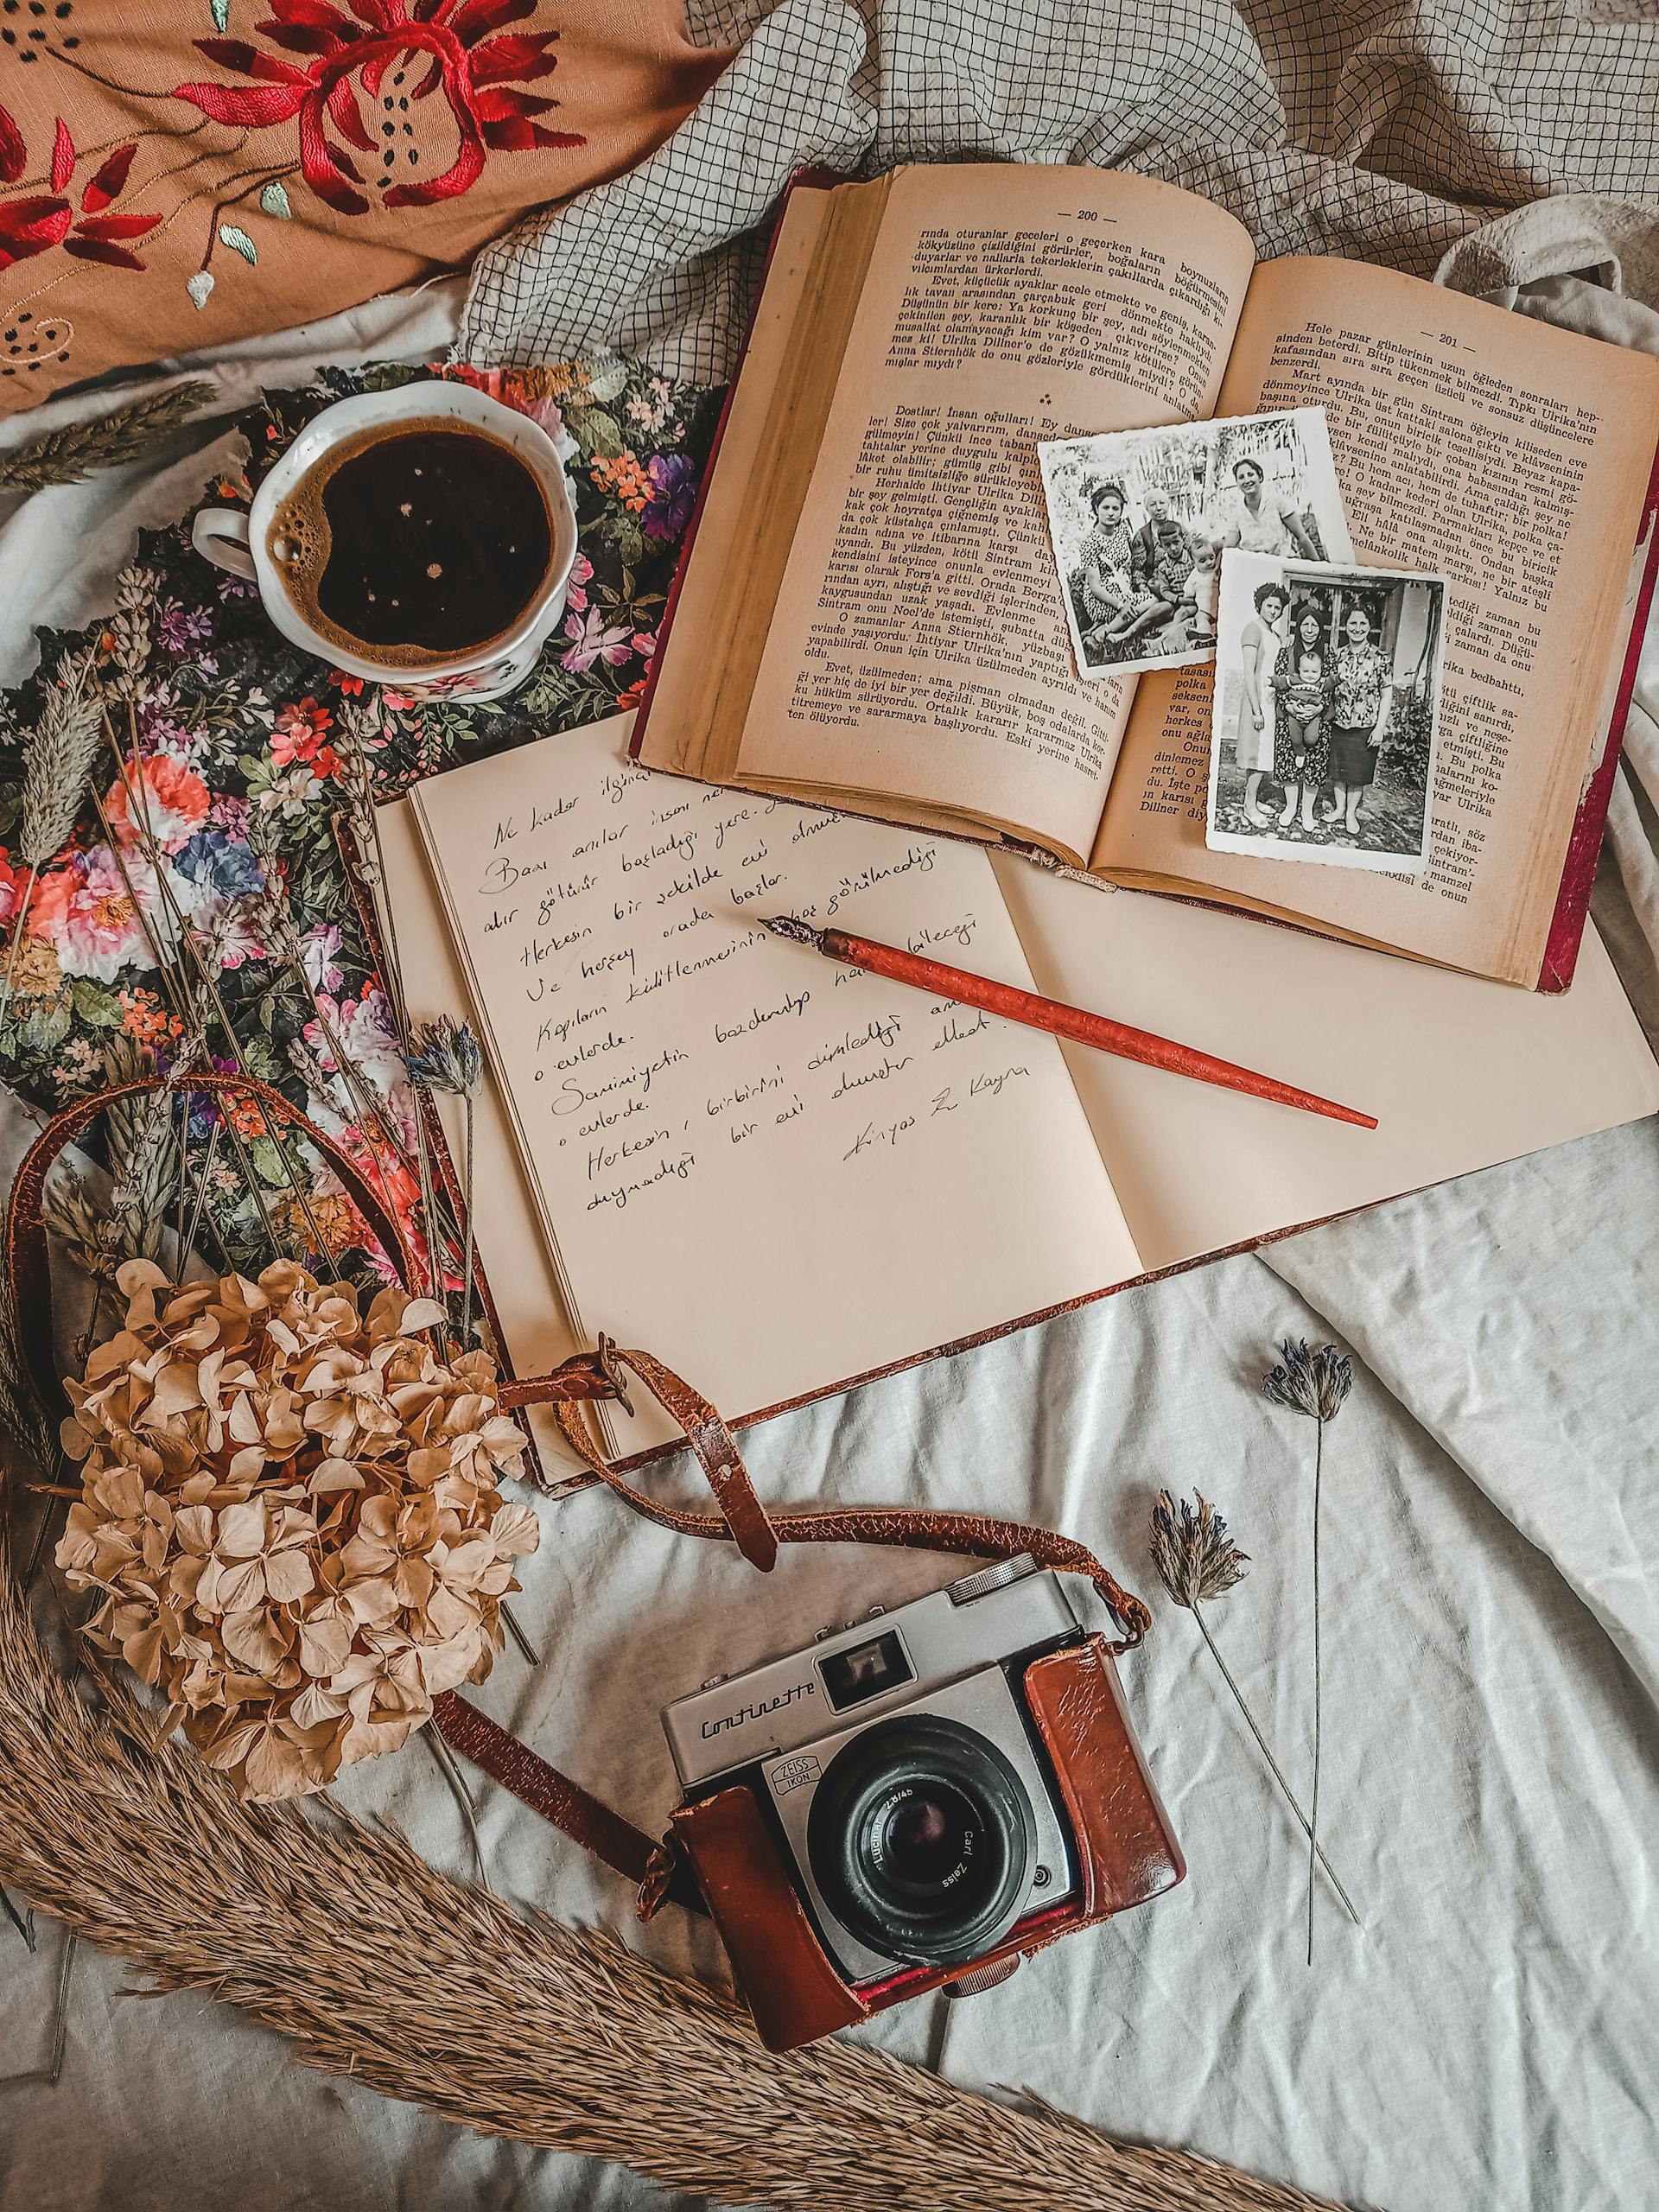 An old notebook with old photos | Source: Pexels